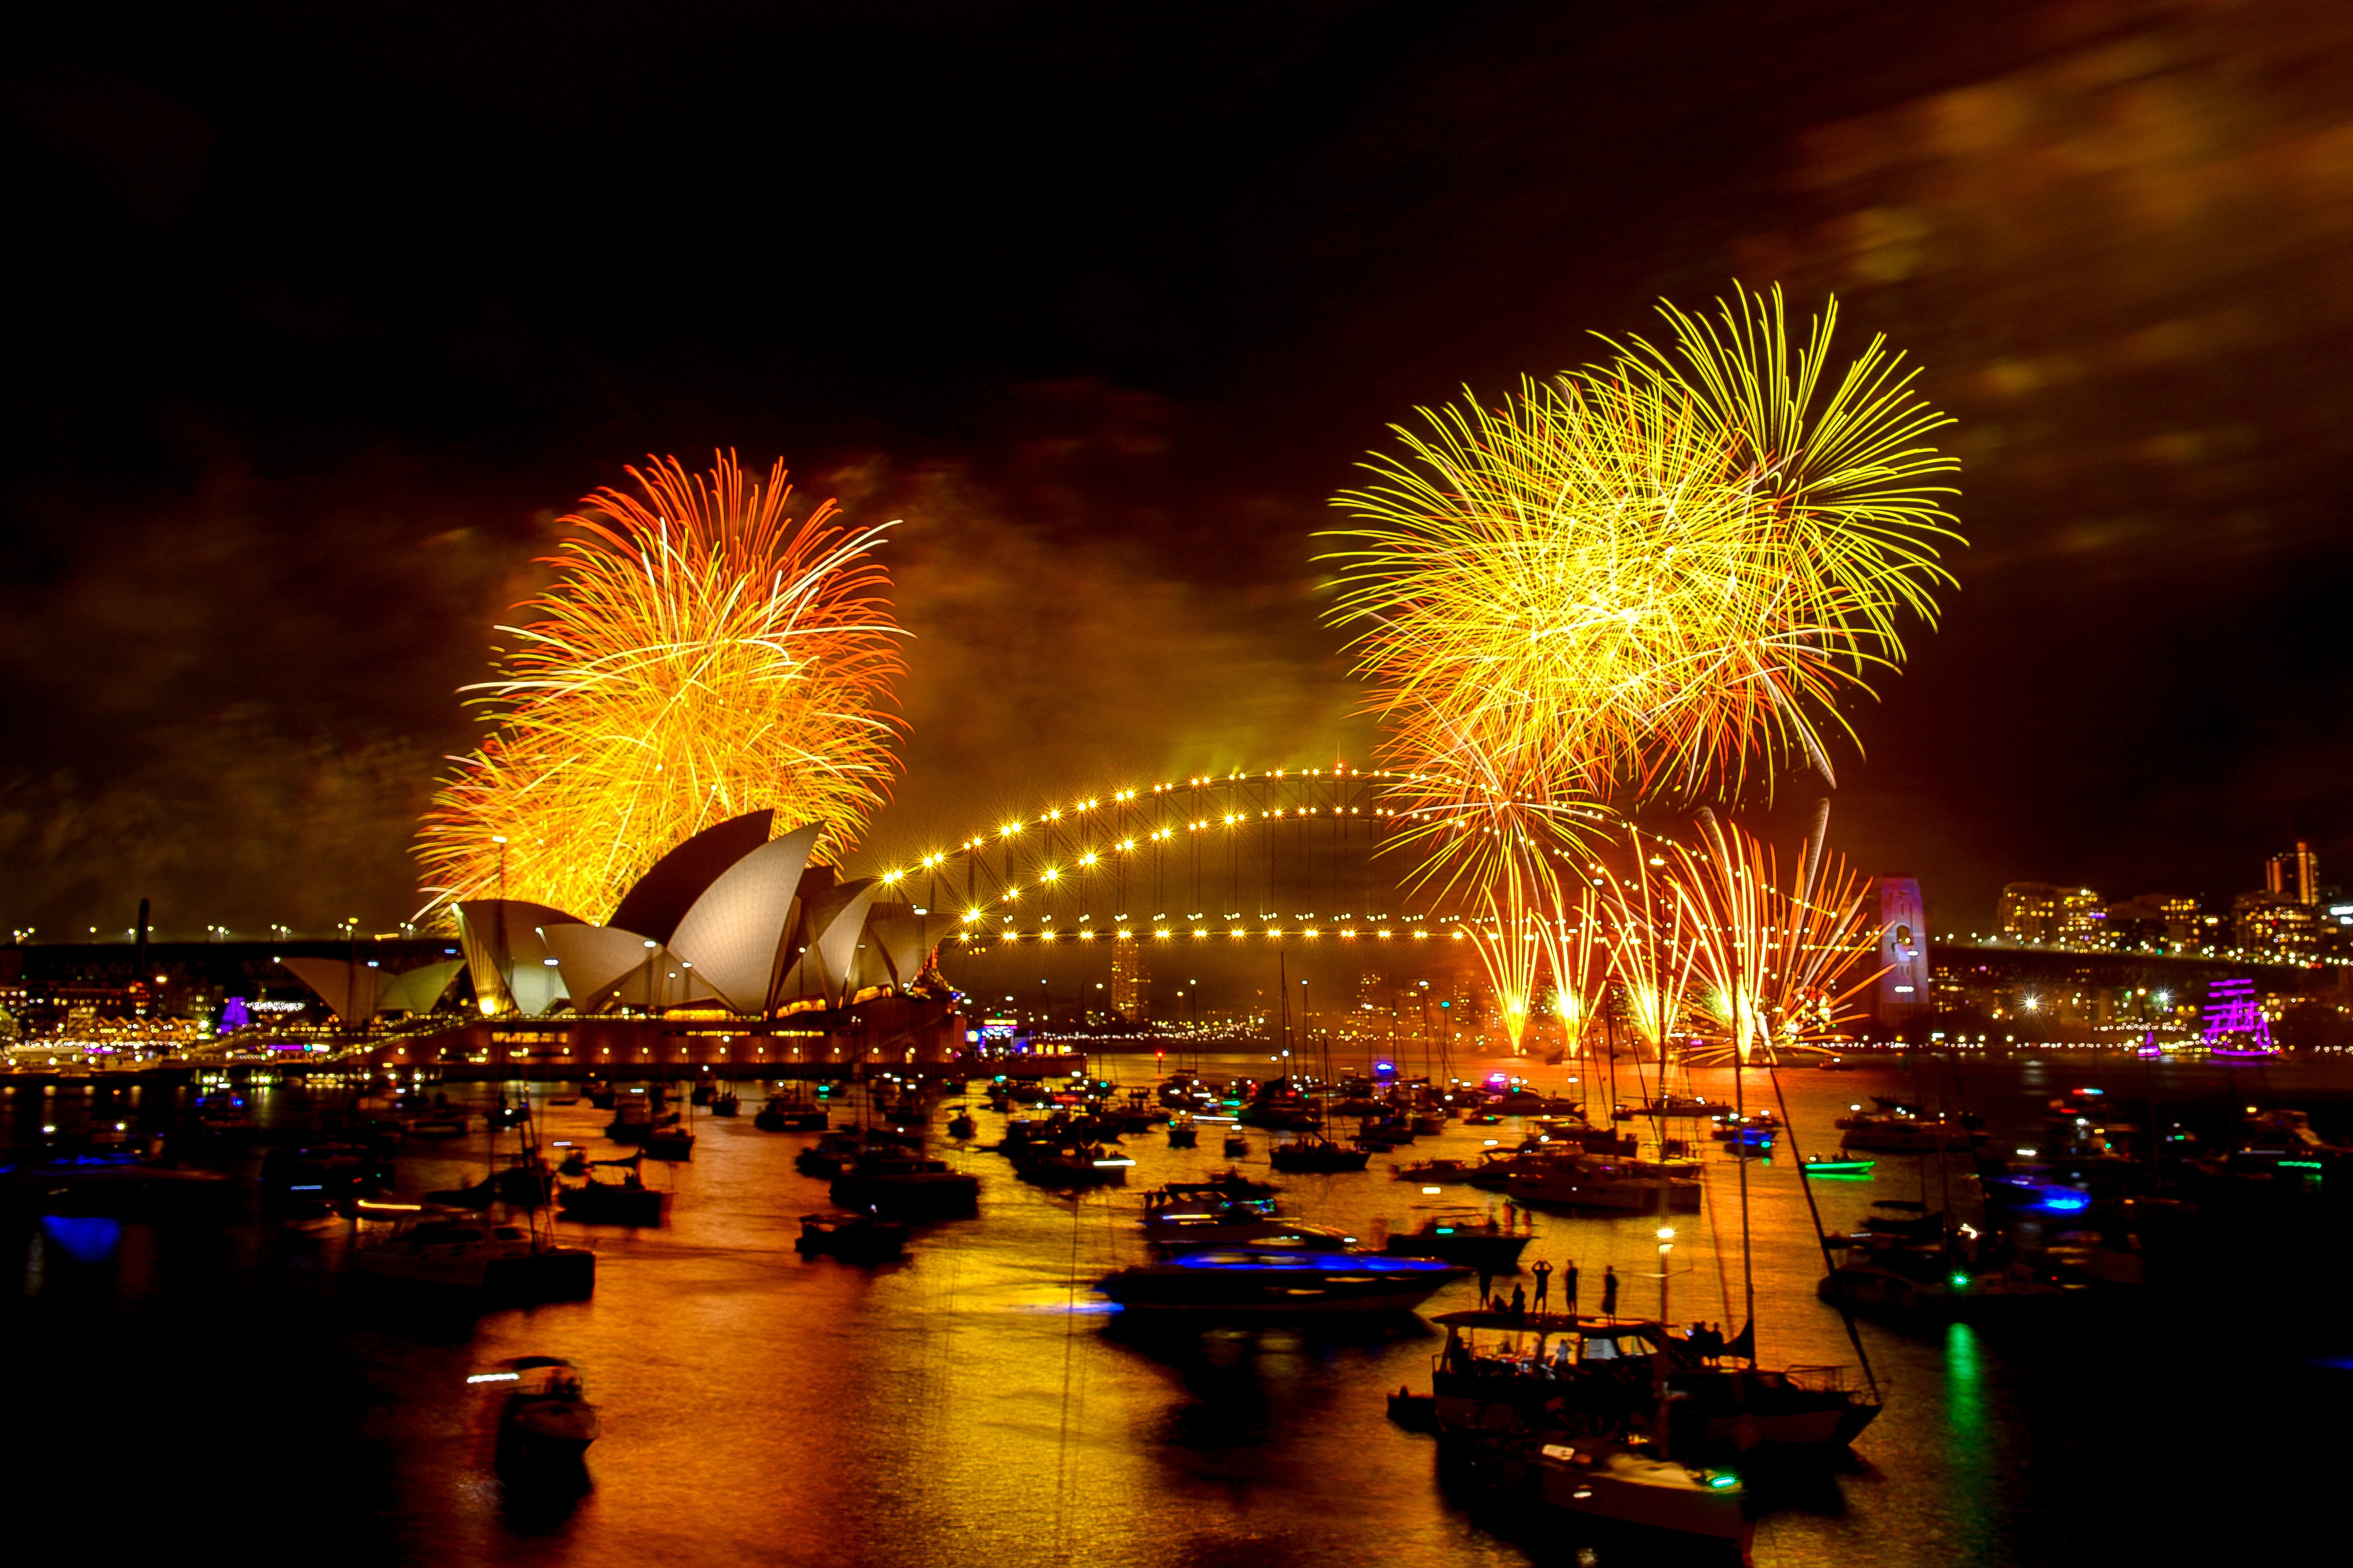 More the 1 million people watched the 12-minute firework display on the Sydney Harbour Bridge